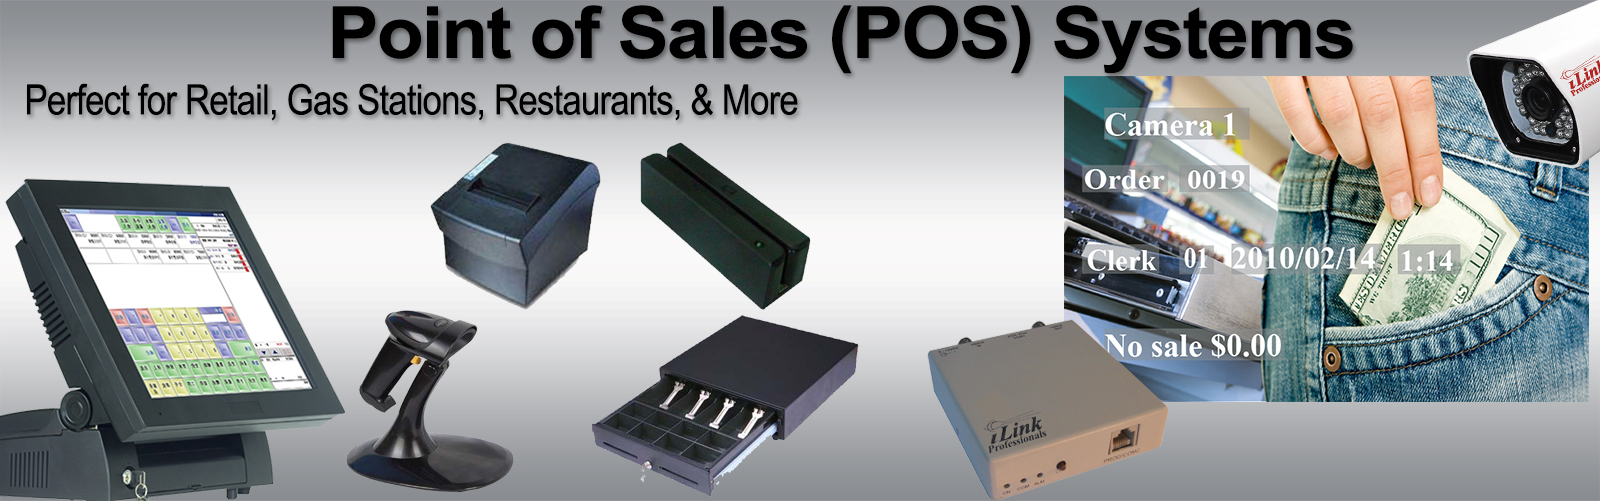 Best Deal Camera Security & POS Point of Sale System Combo Kit Retail Store